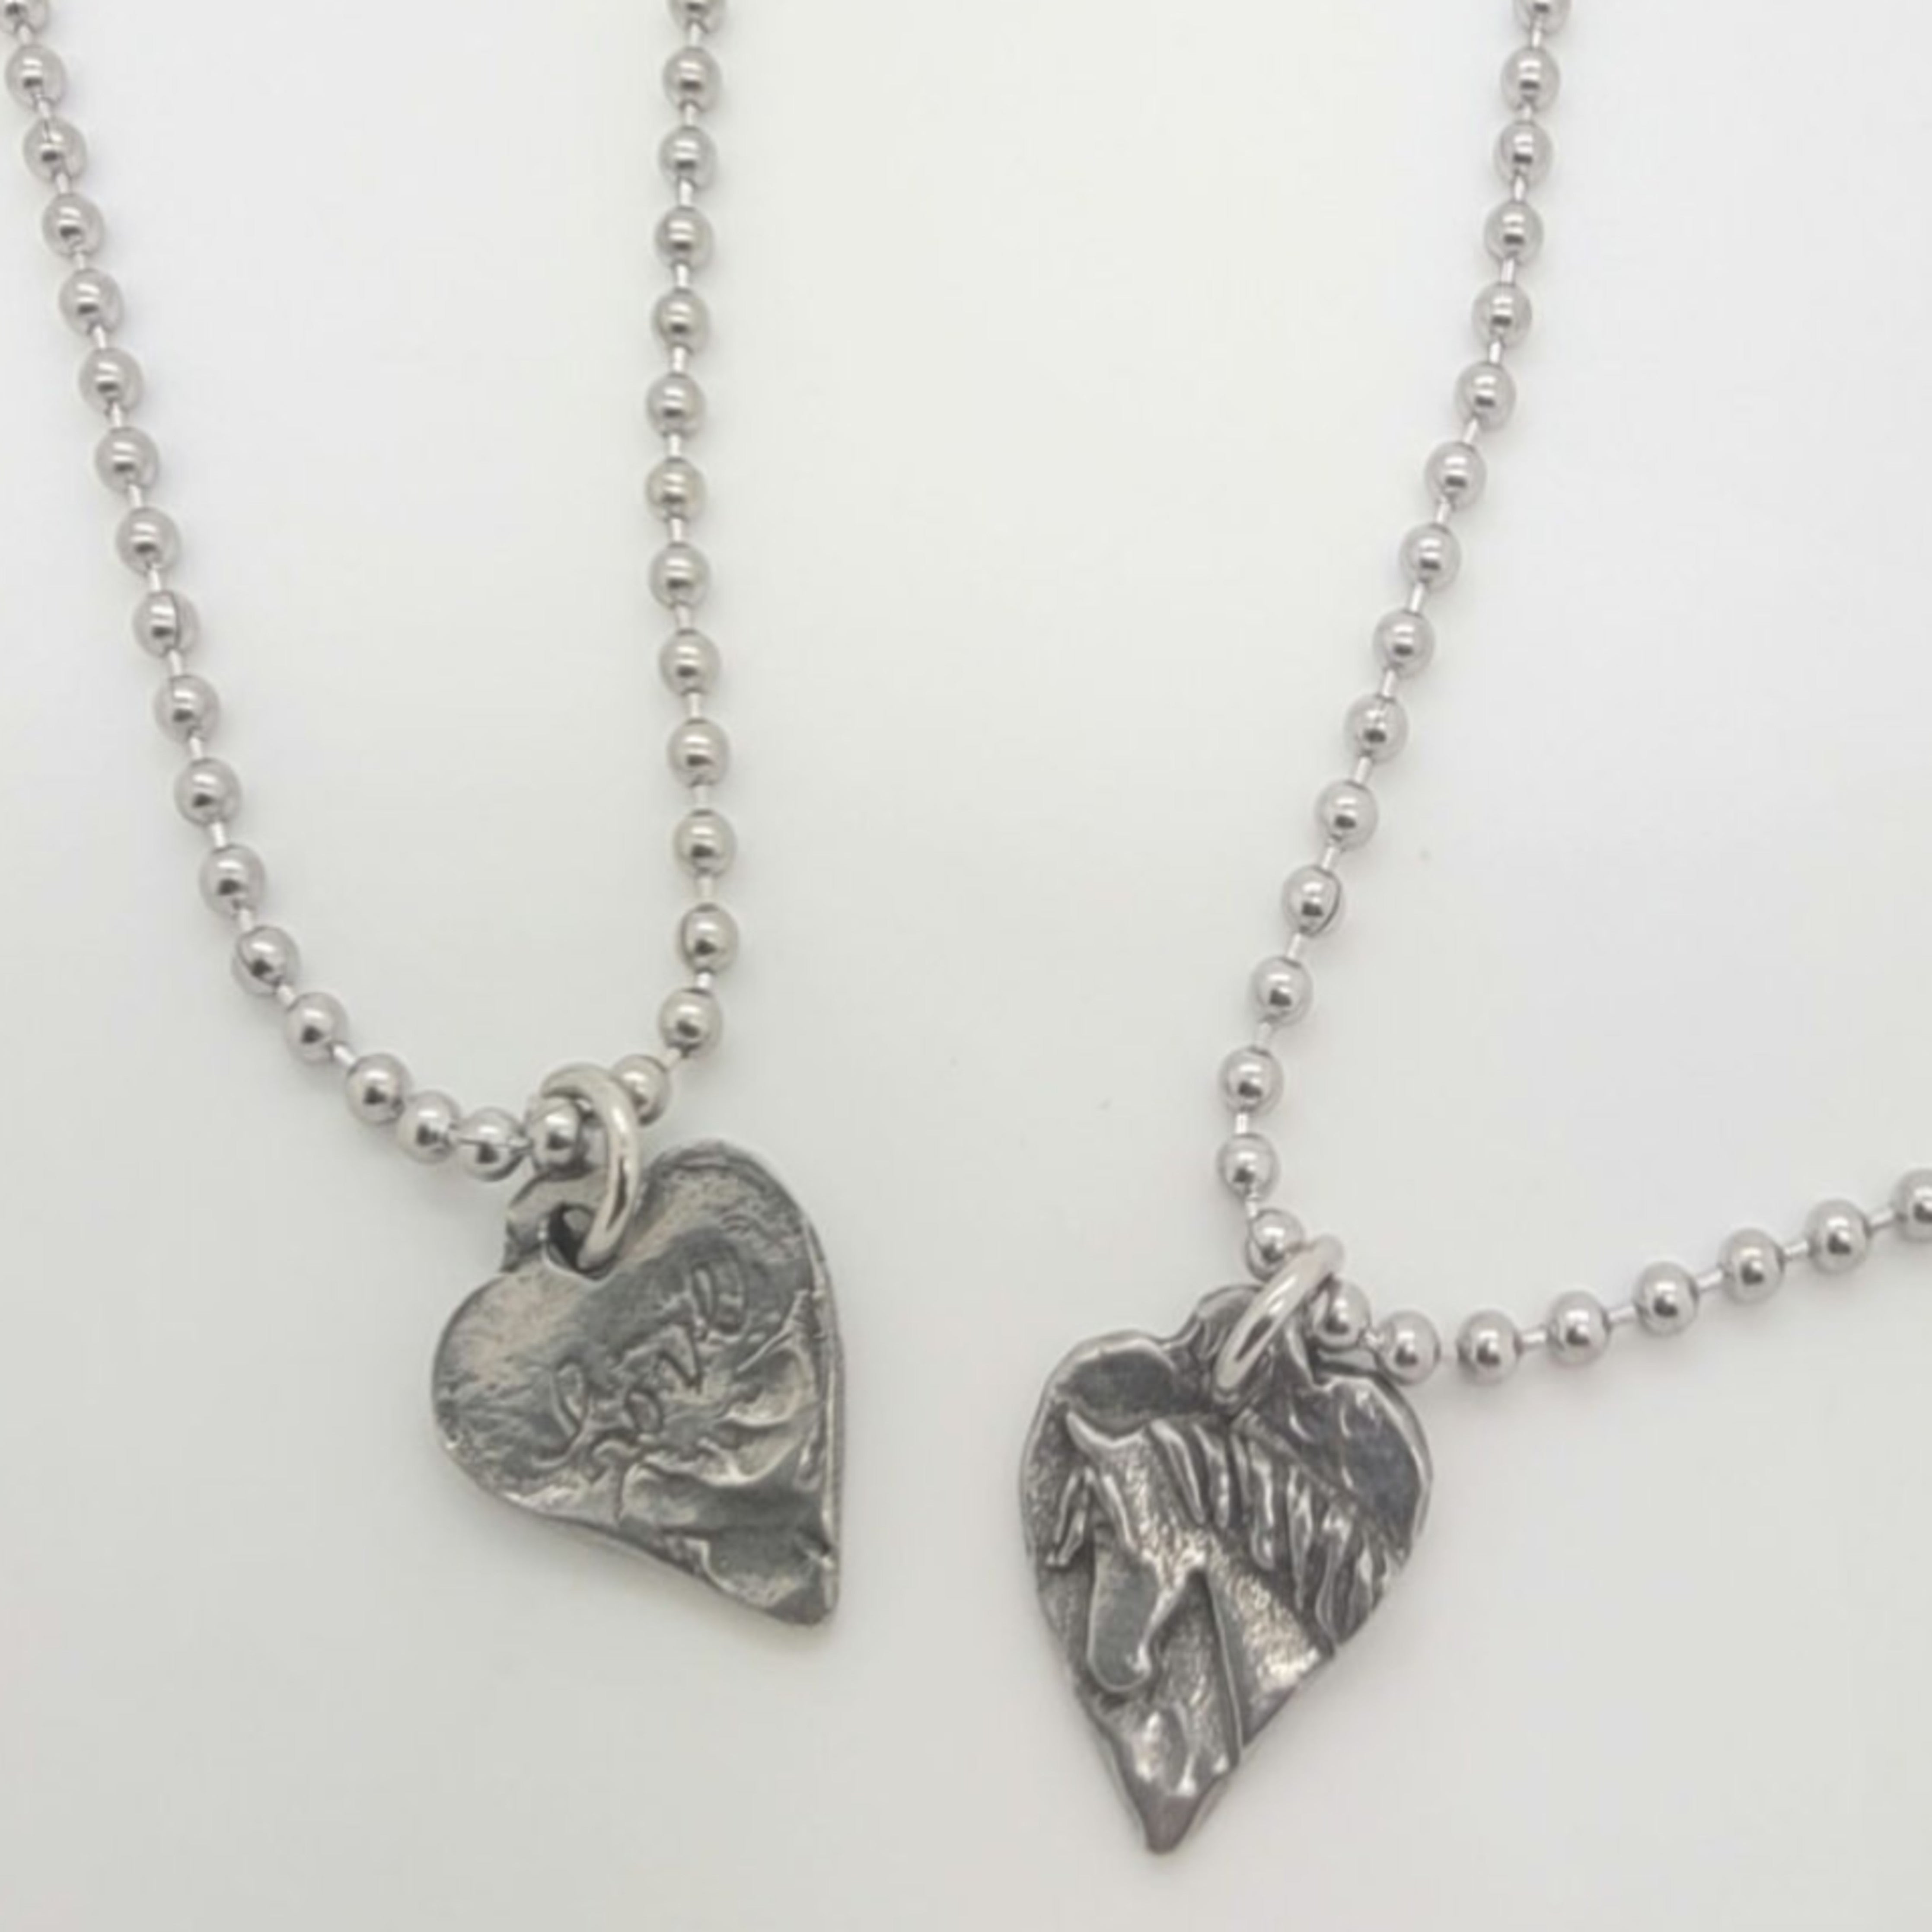 Swanky Equestrian Love Necklace